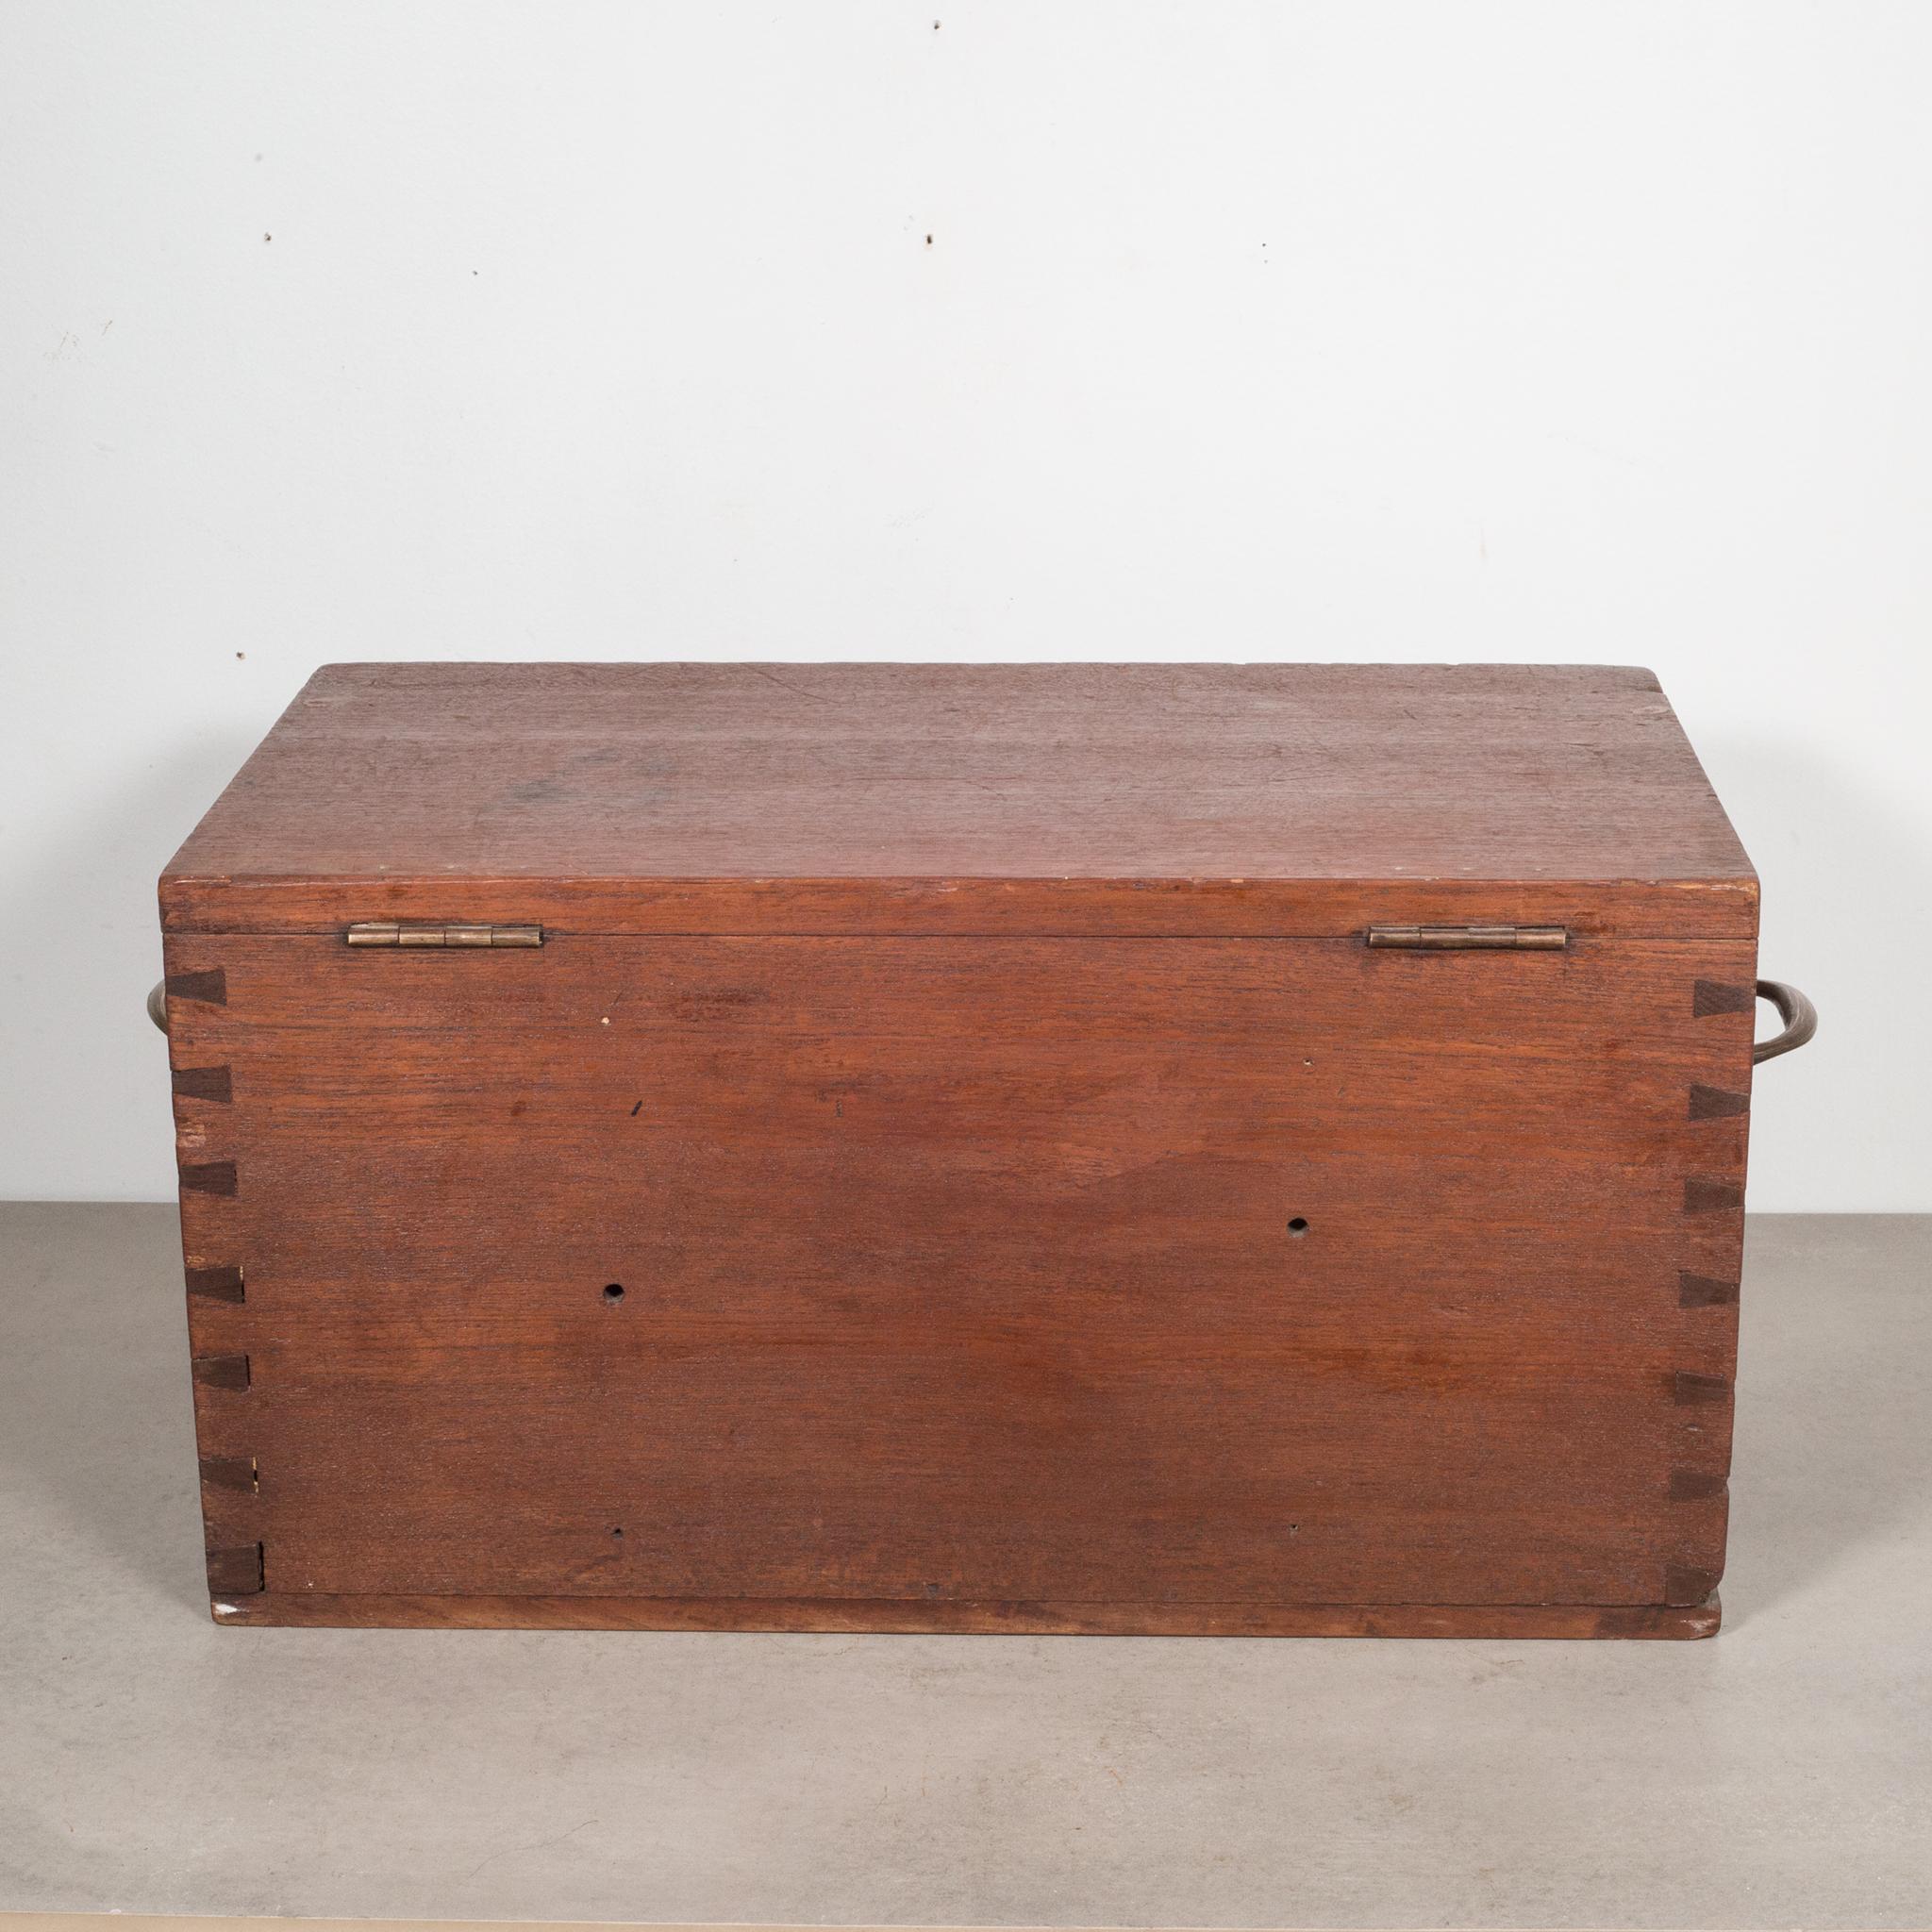 Industrial Large Handmade Wood and Brass Box c.1880-1920